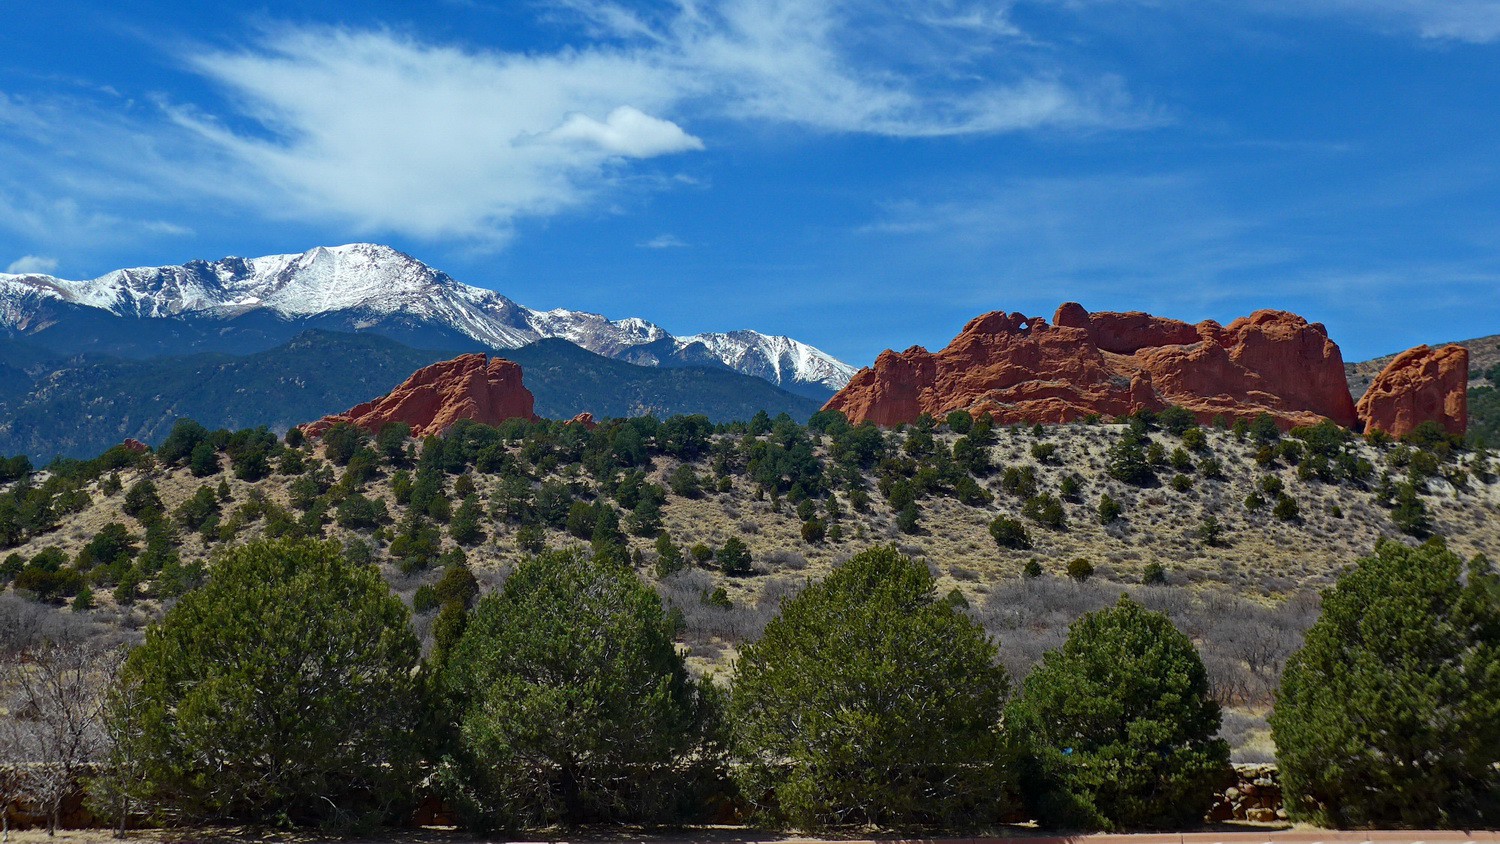 Red rocks in the Garden of the Gods with 4300 meters high Pikes Peak